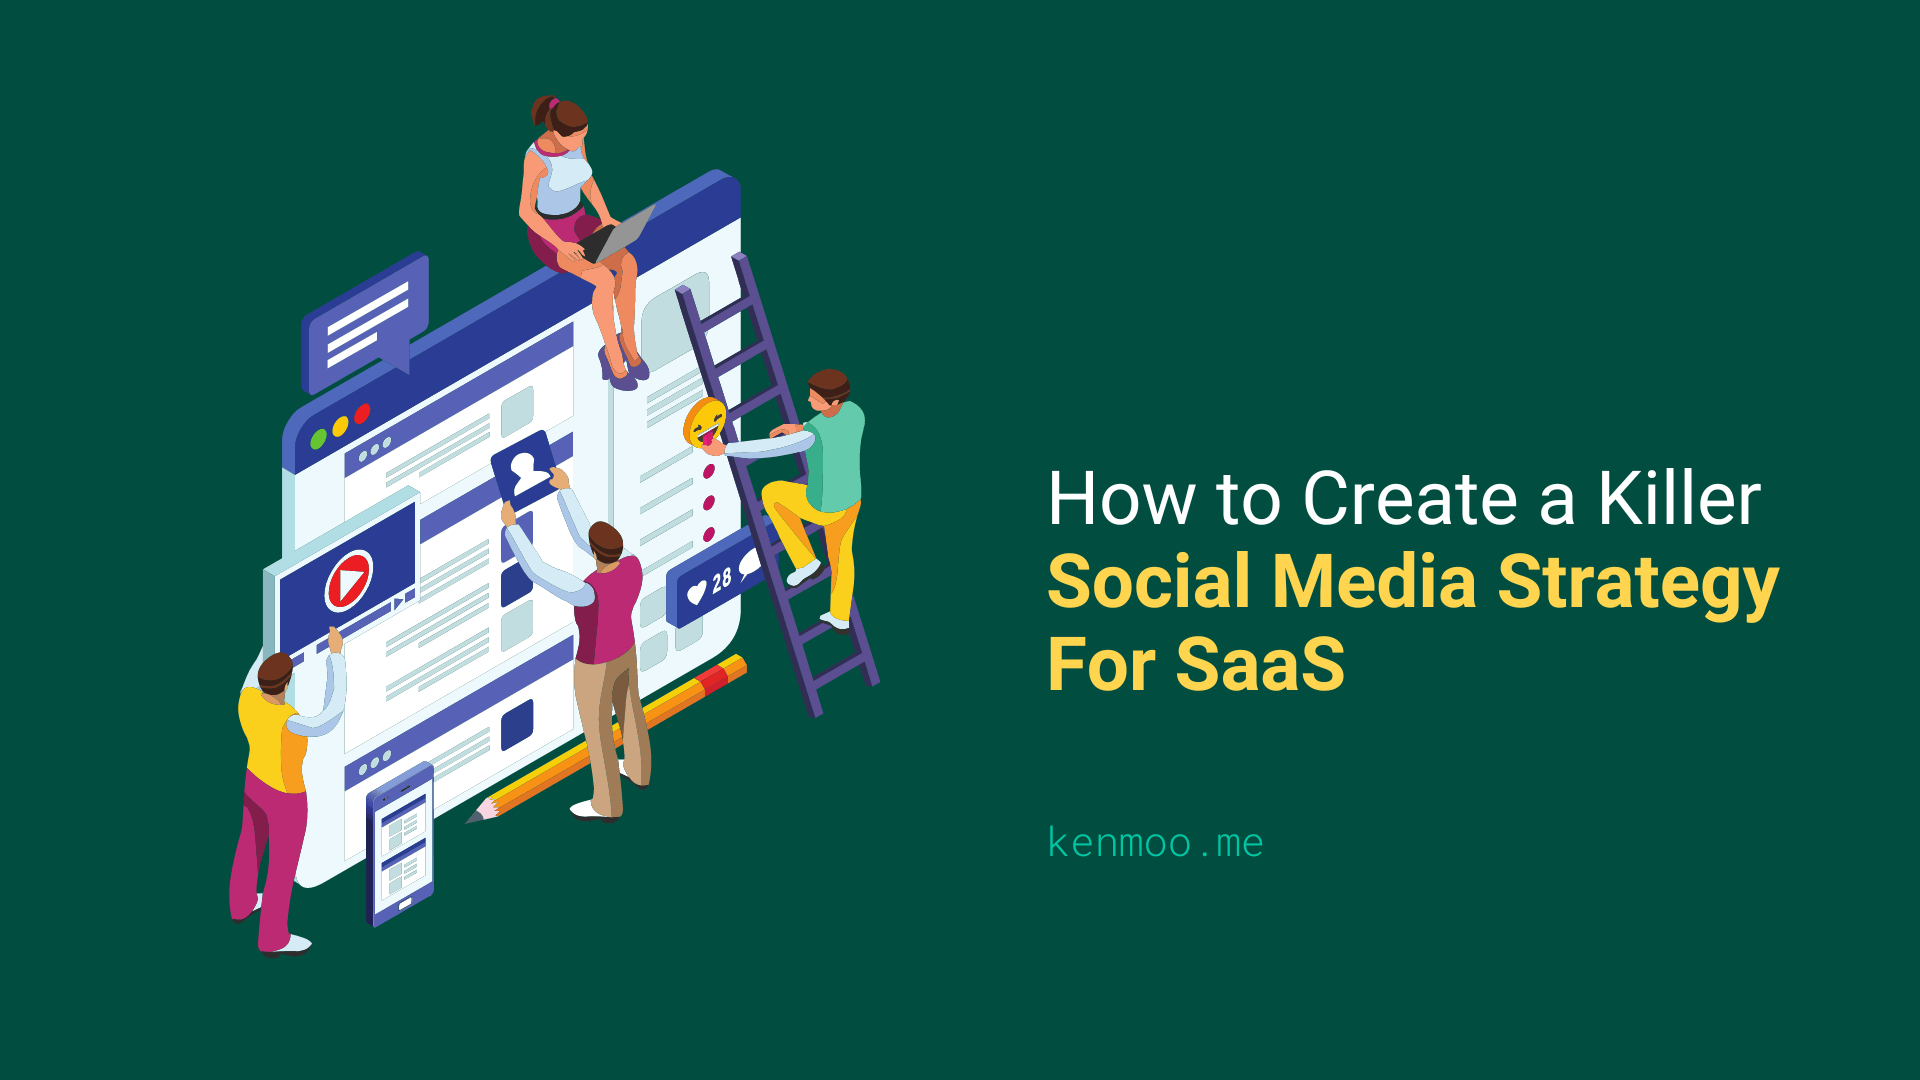 How to Create a Killer Social Media Strategy For SaaS